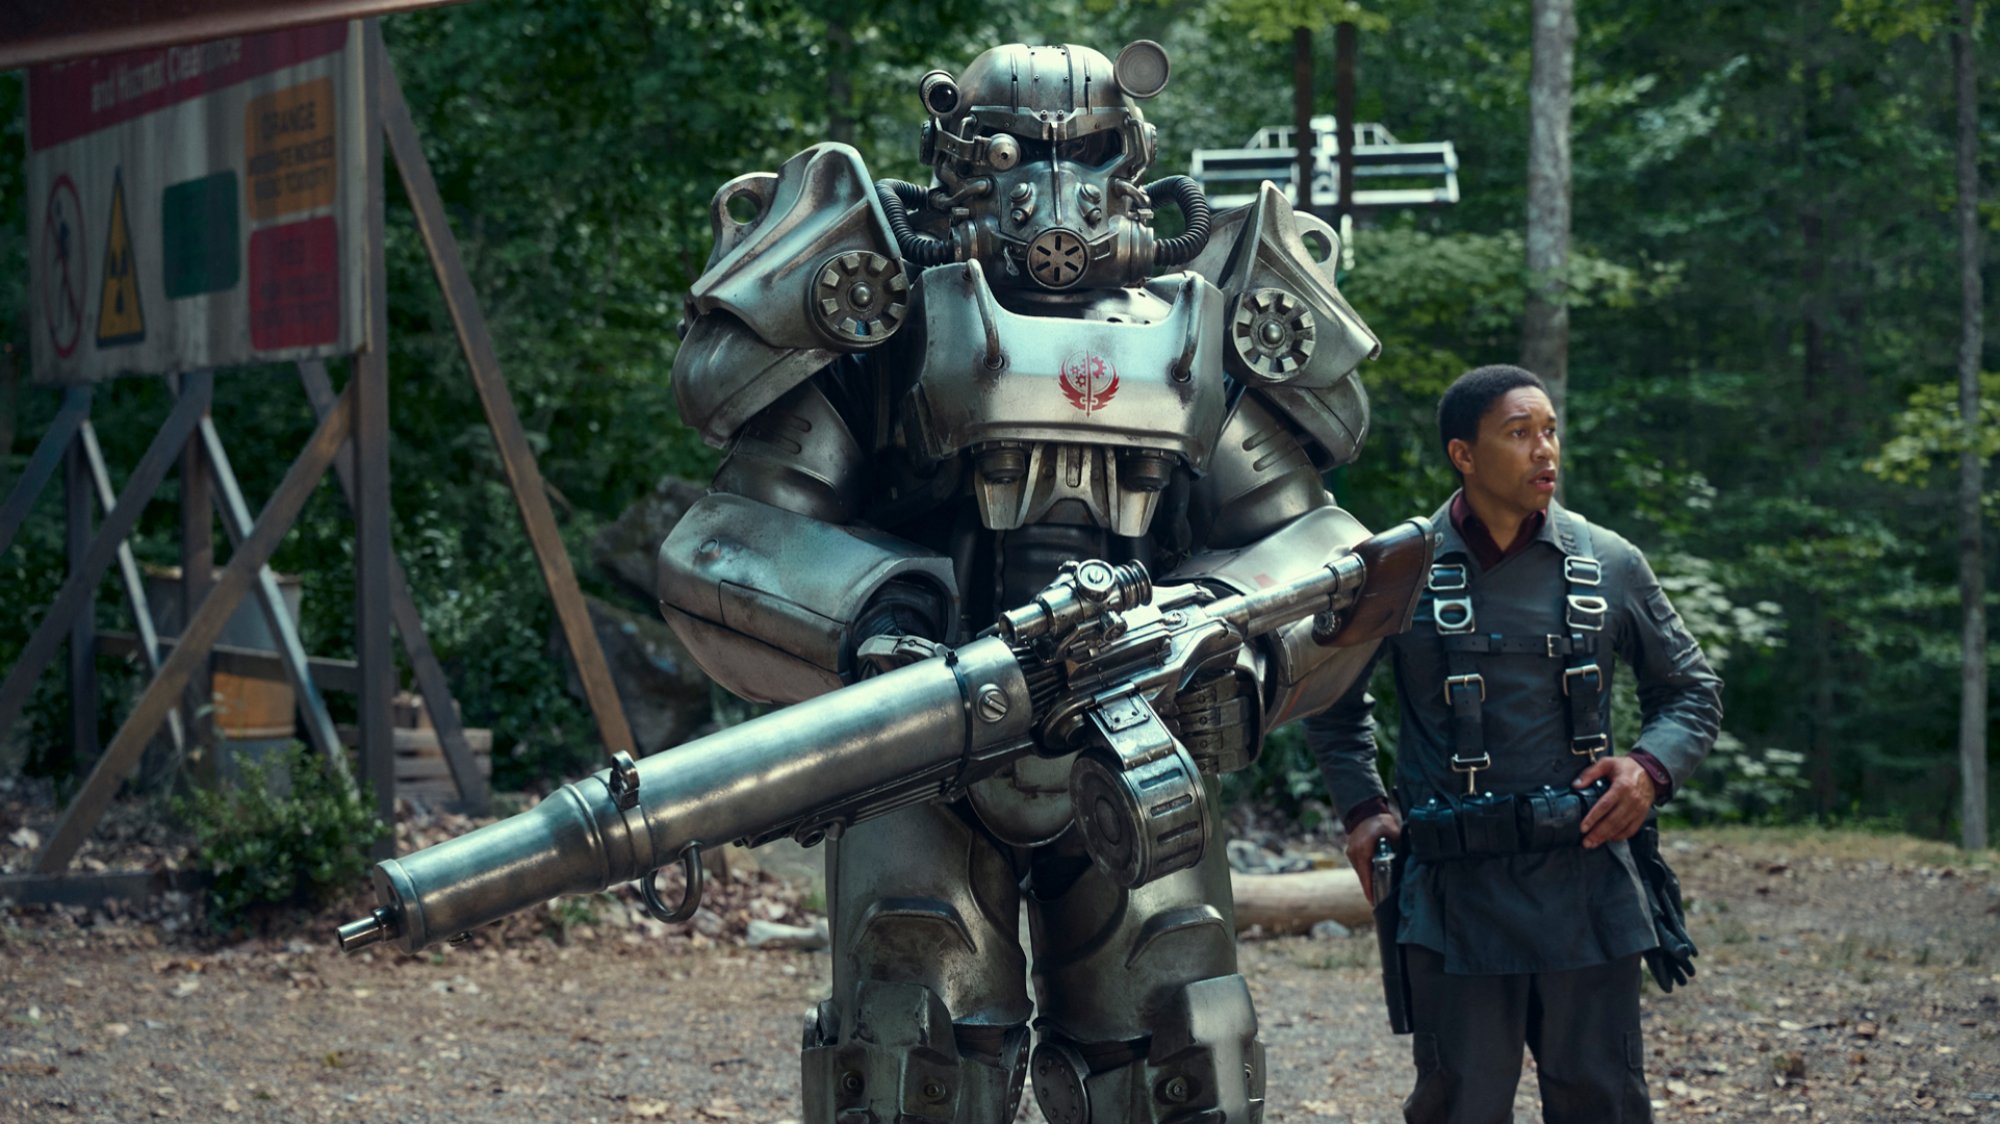 Aaron Moten as Maximus in "Fallout" beside his soon-to-be power armor.